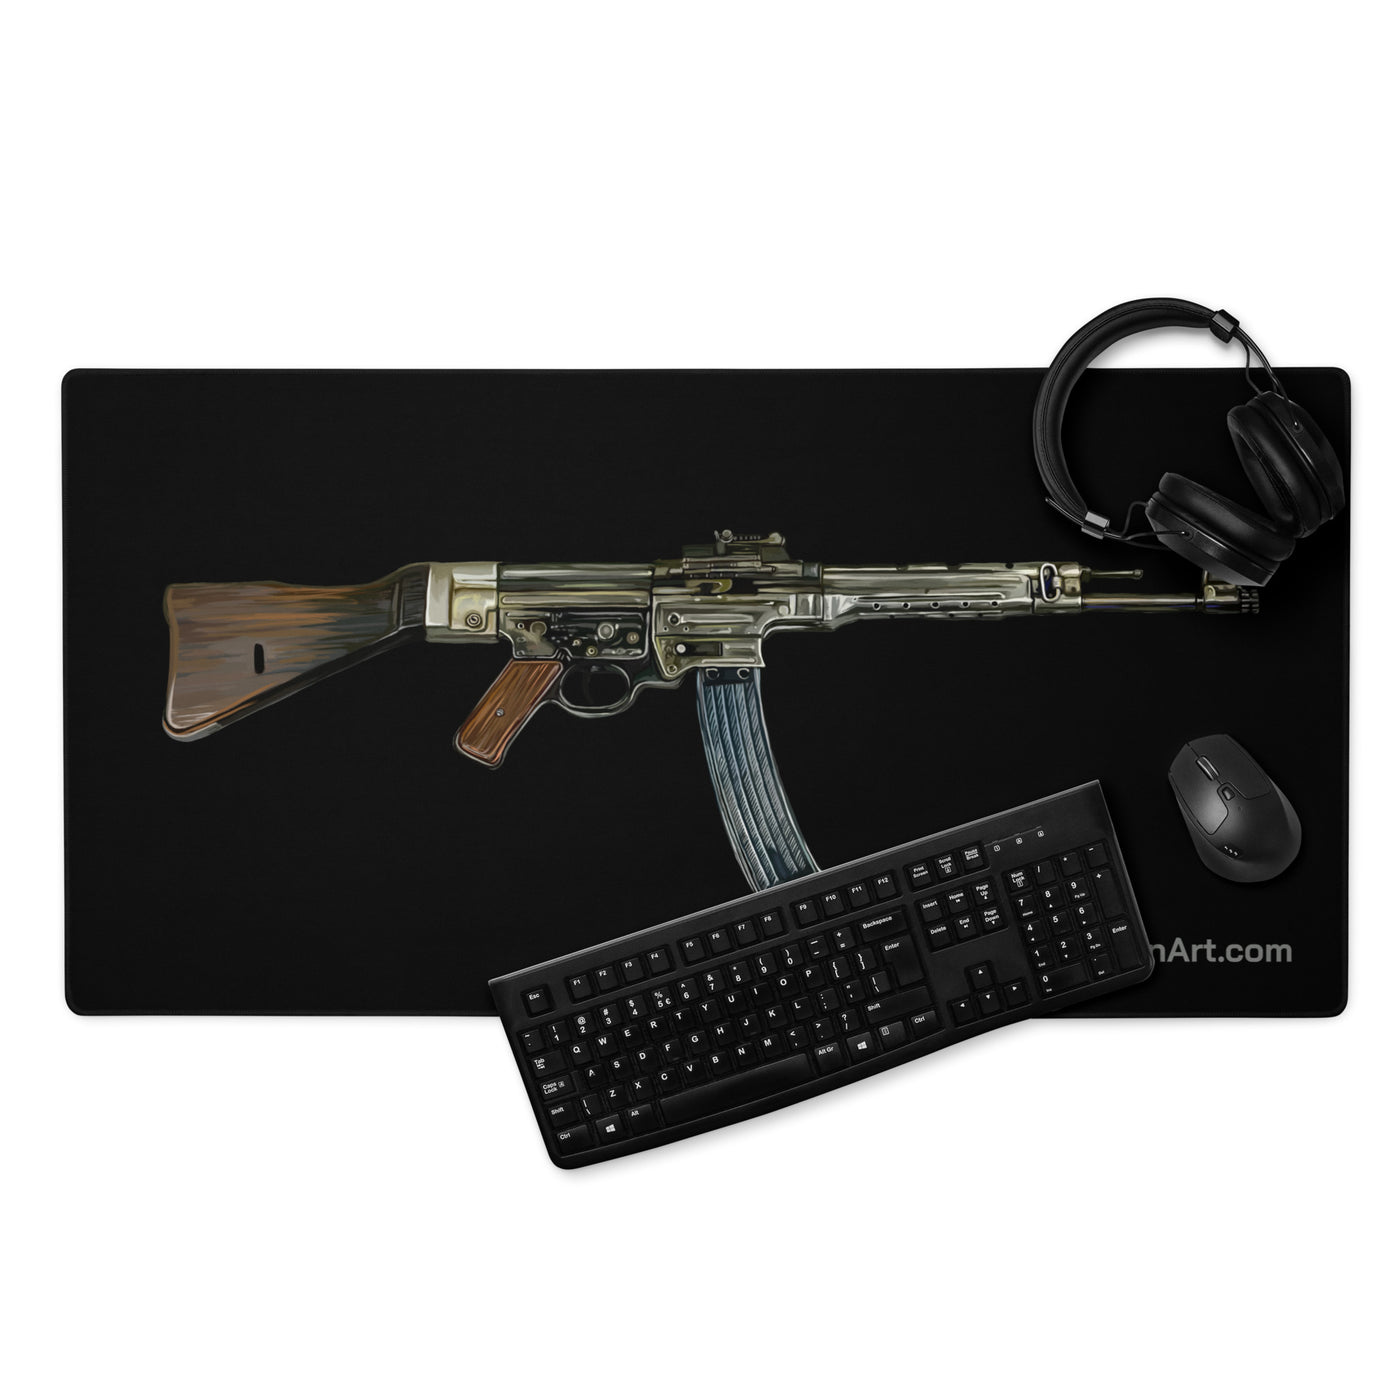 WWII German Assault Rifle Gaming Mouse Pad - Just The Piece - Black Background